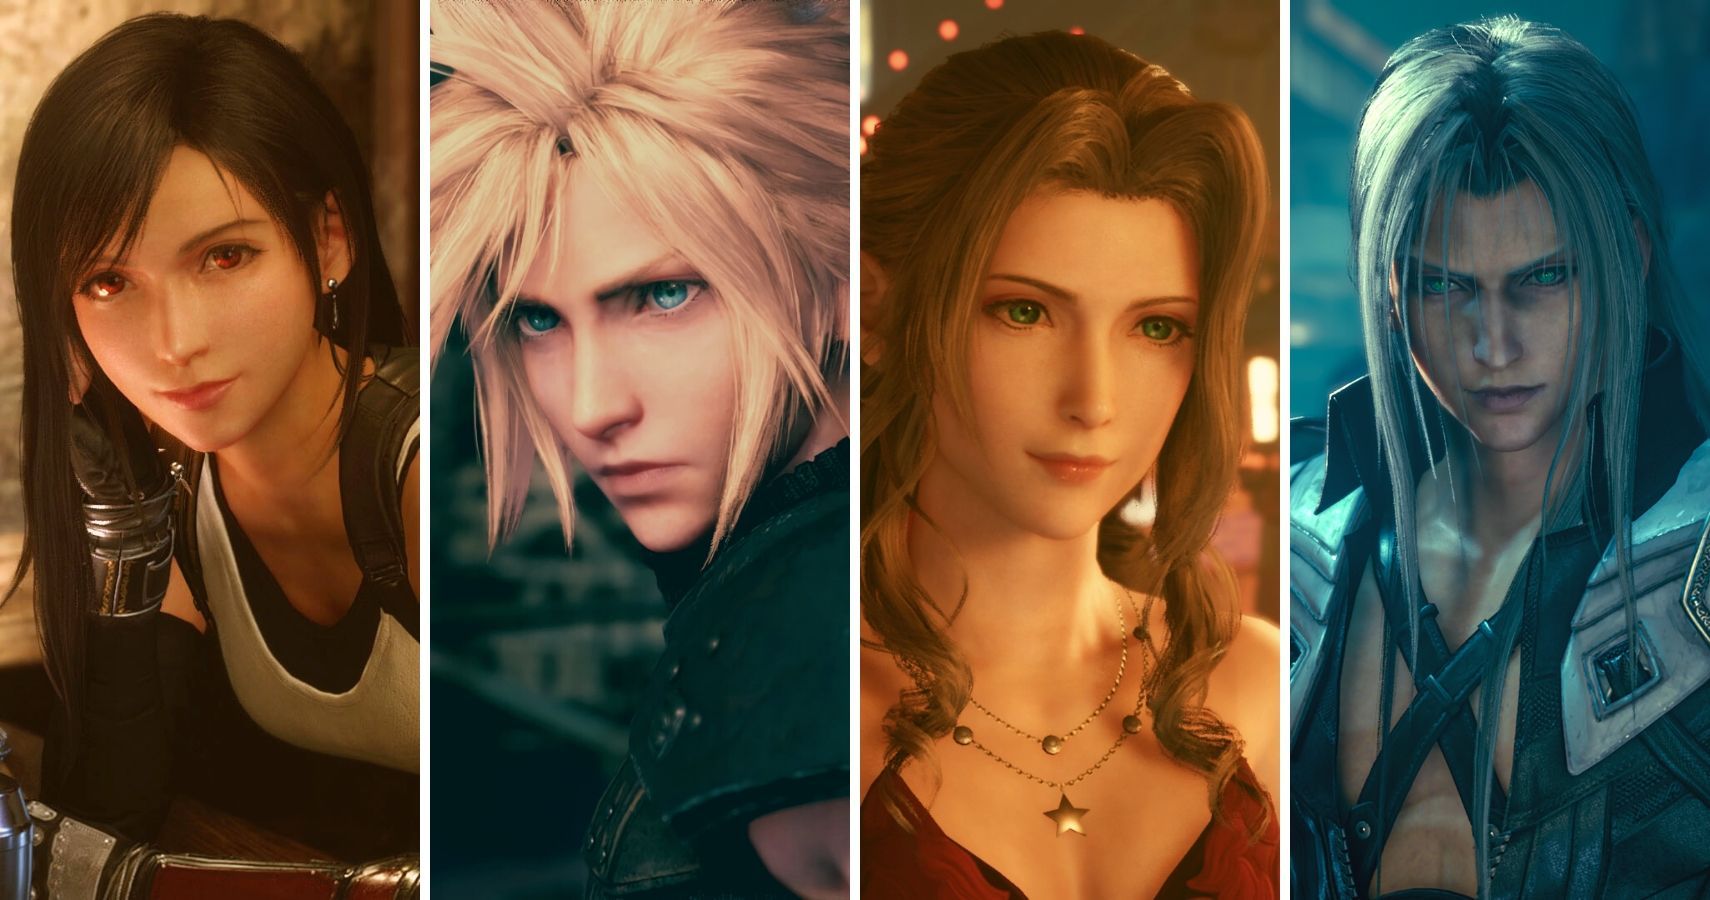 Final Fantasy 7: The MBTI® Of The Main Characters